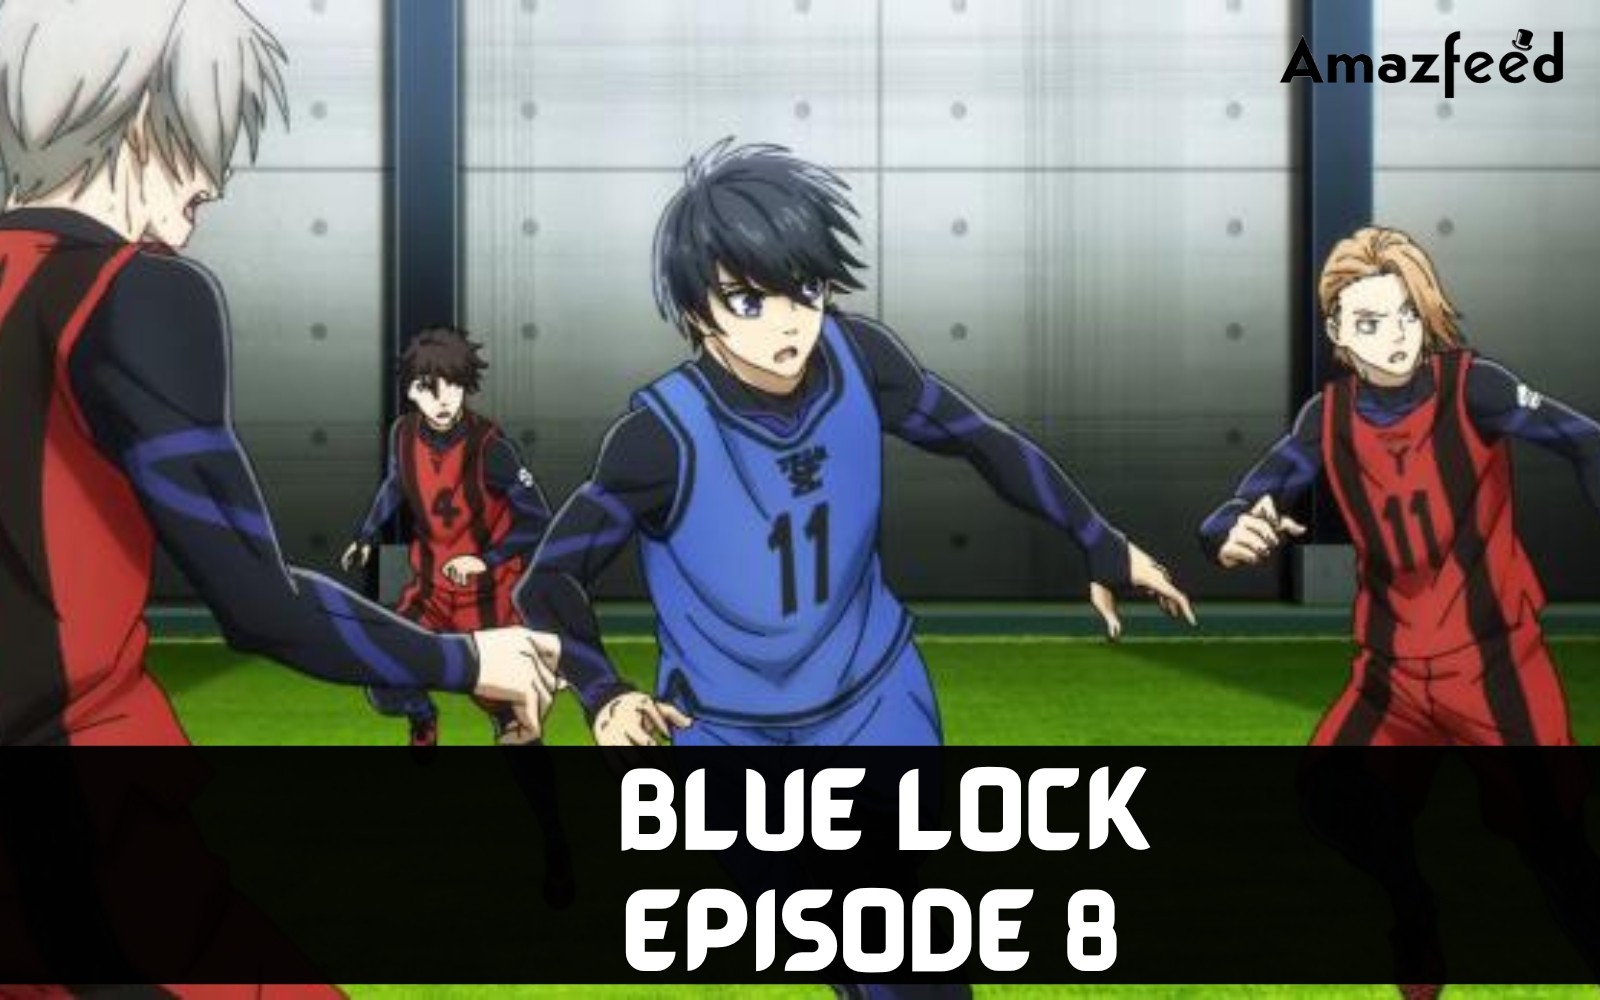 Blue Lock Episode 5 - Believe The Hype, This Series Is a Must-Watch